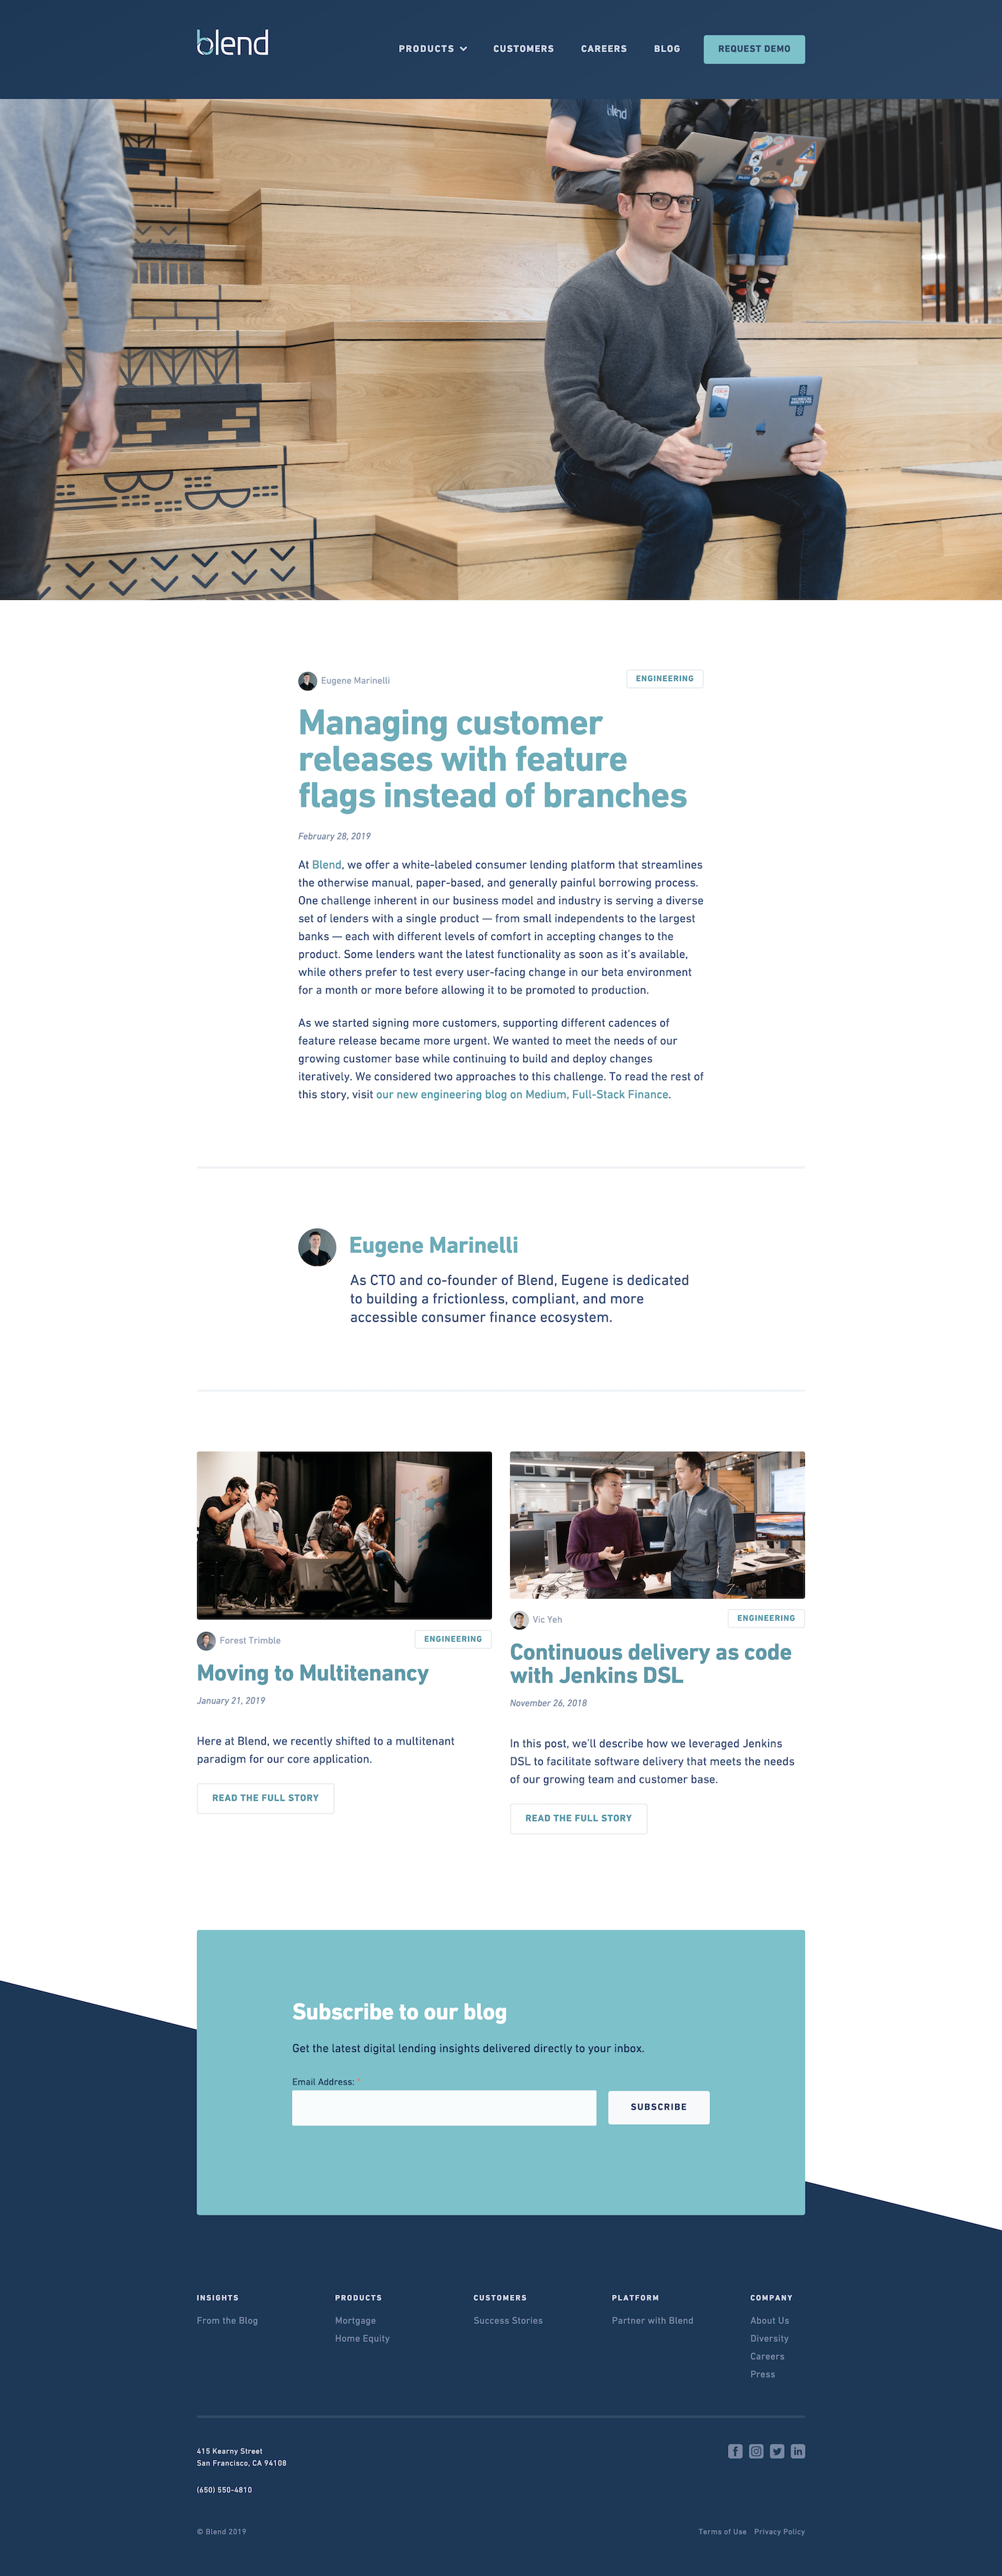 Screenshot of the Blog - Article page from the Blend website.